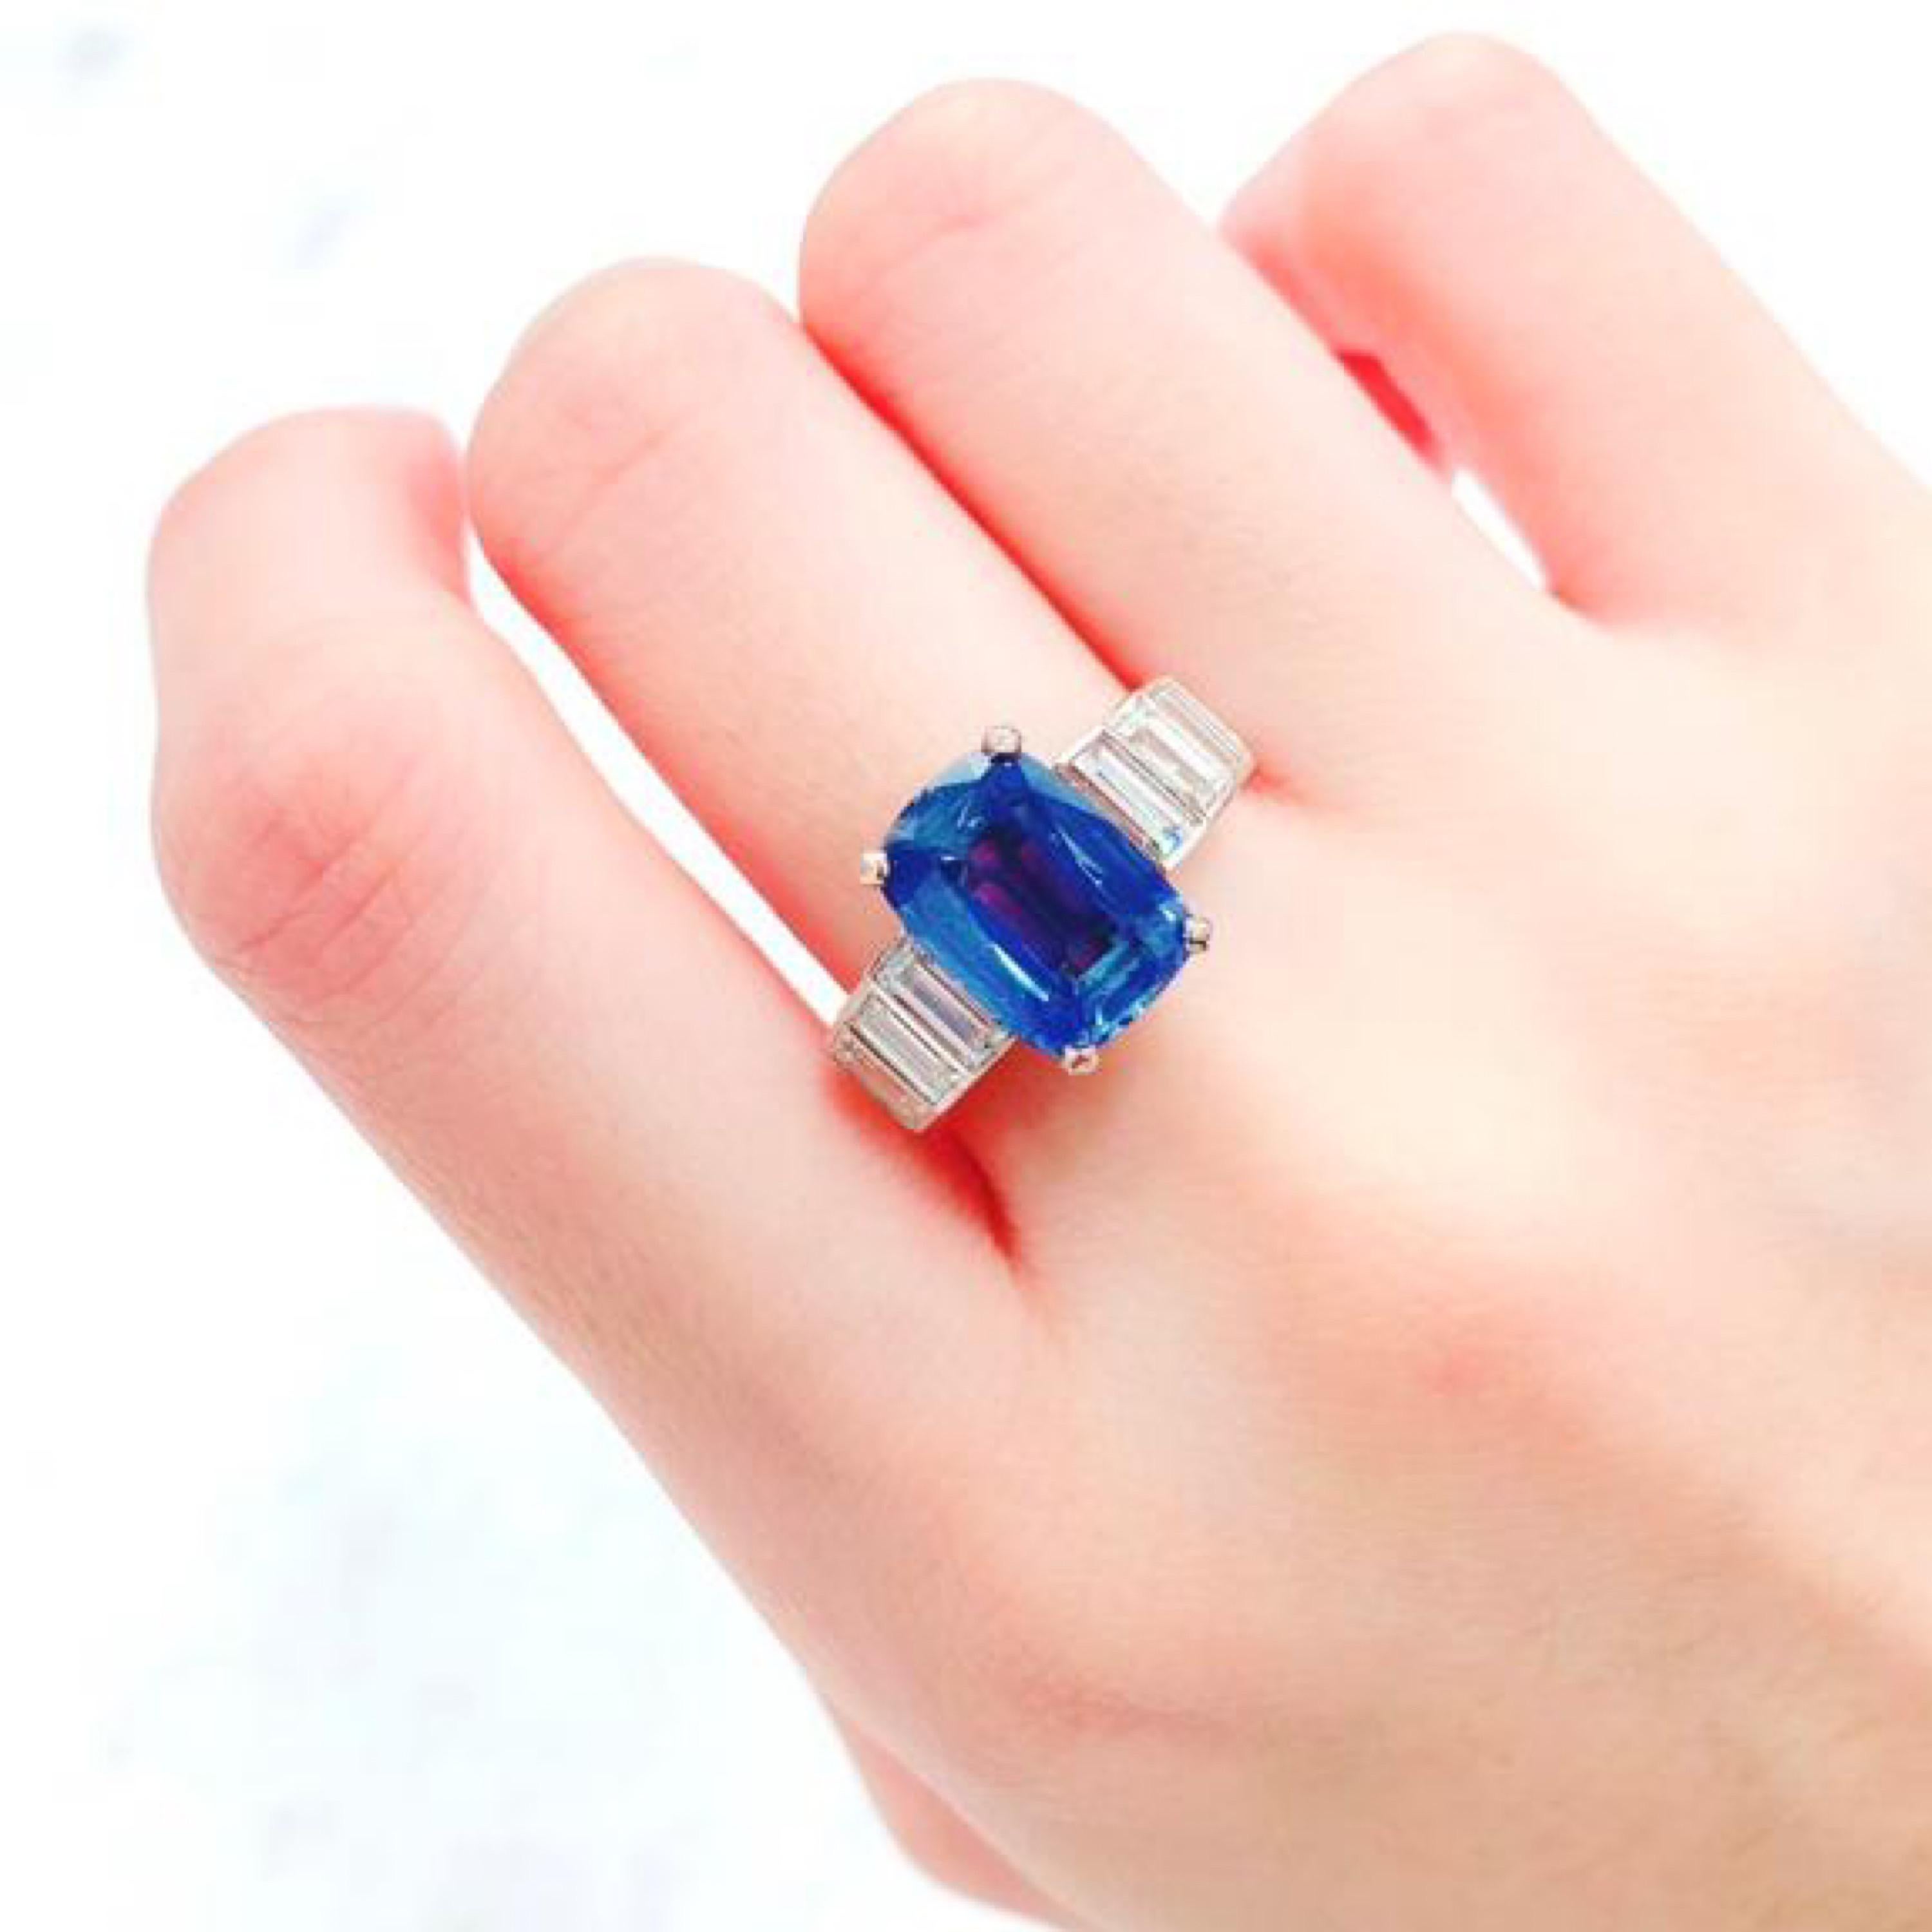 From Emilio Jewelry New York, a trusted and respected dealer located on New York's iconic Fifth Avenue.
Main stone: just under 5 carat center Kashmir Sapphire. Certified by Gueblin and Ssef.
Diamonds totaling about 1.49 carats 
Kashmir - the most